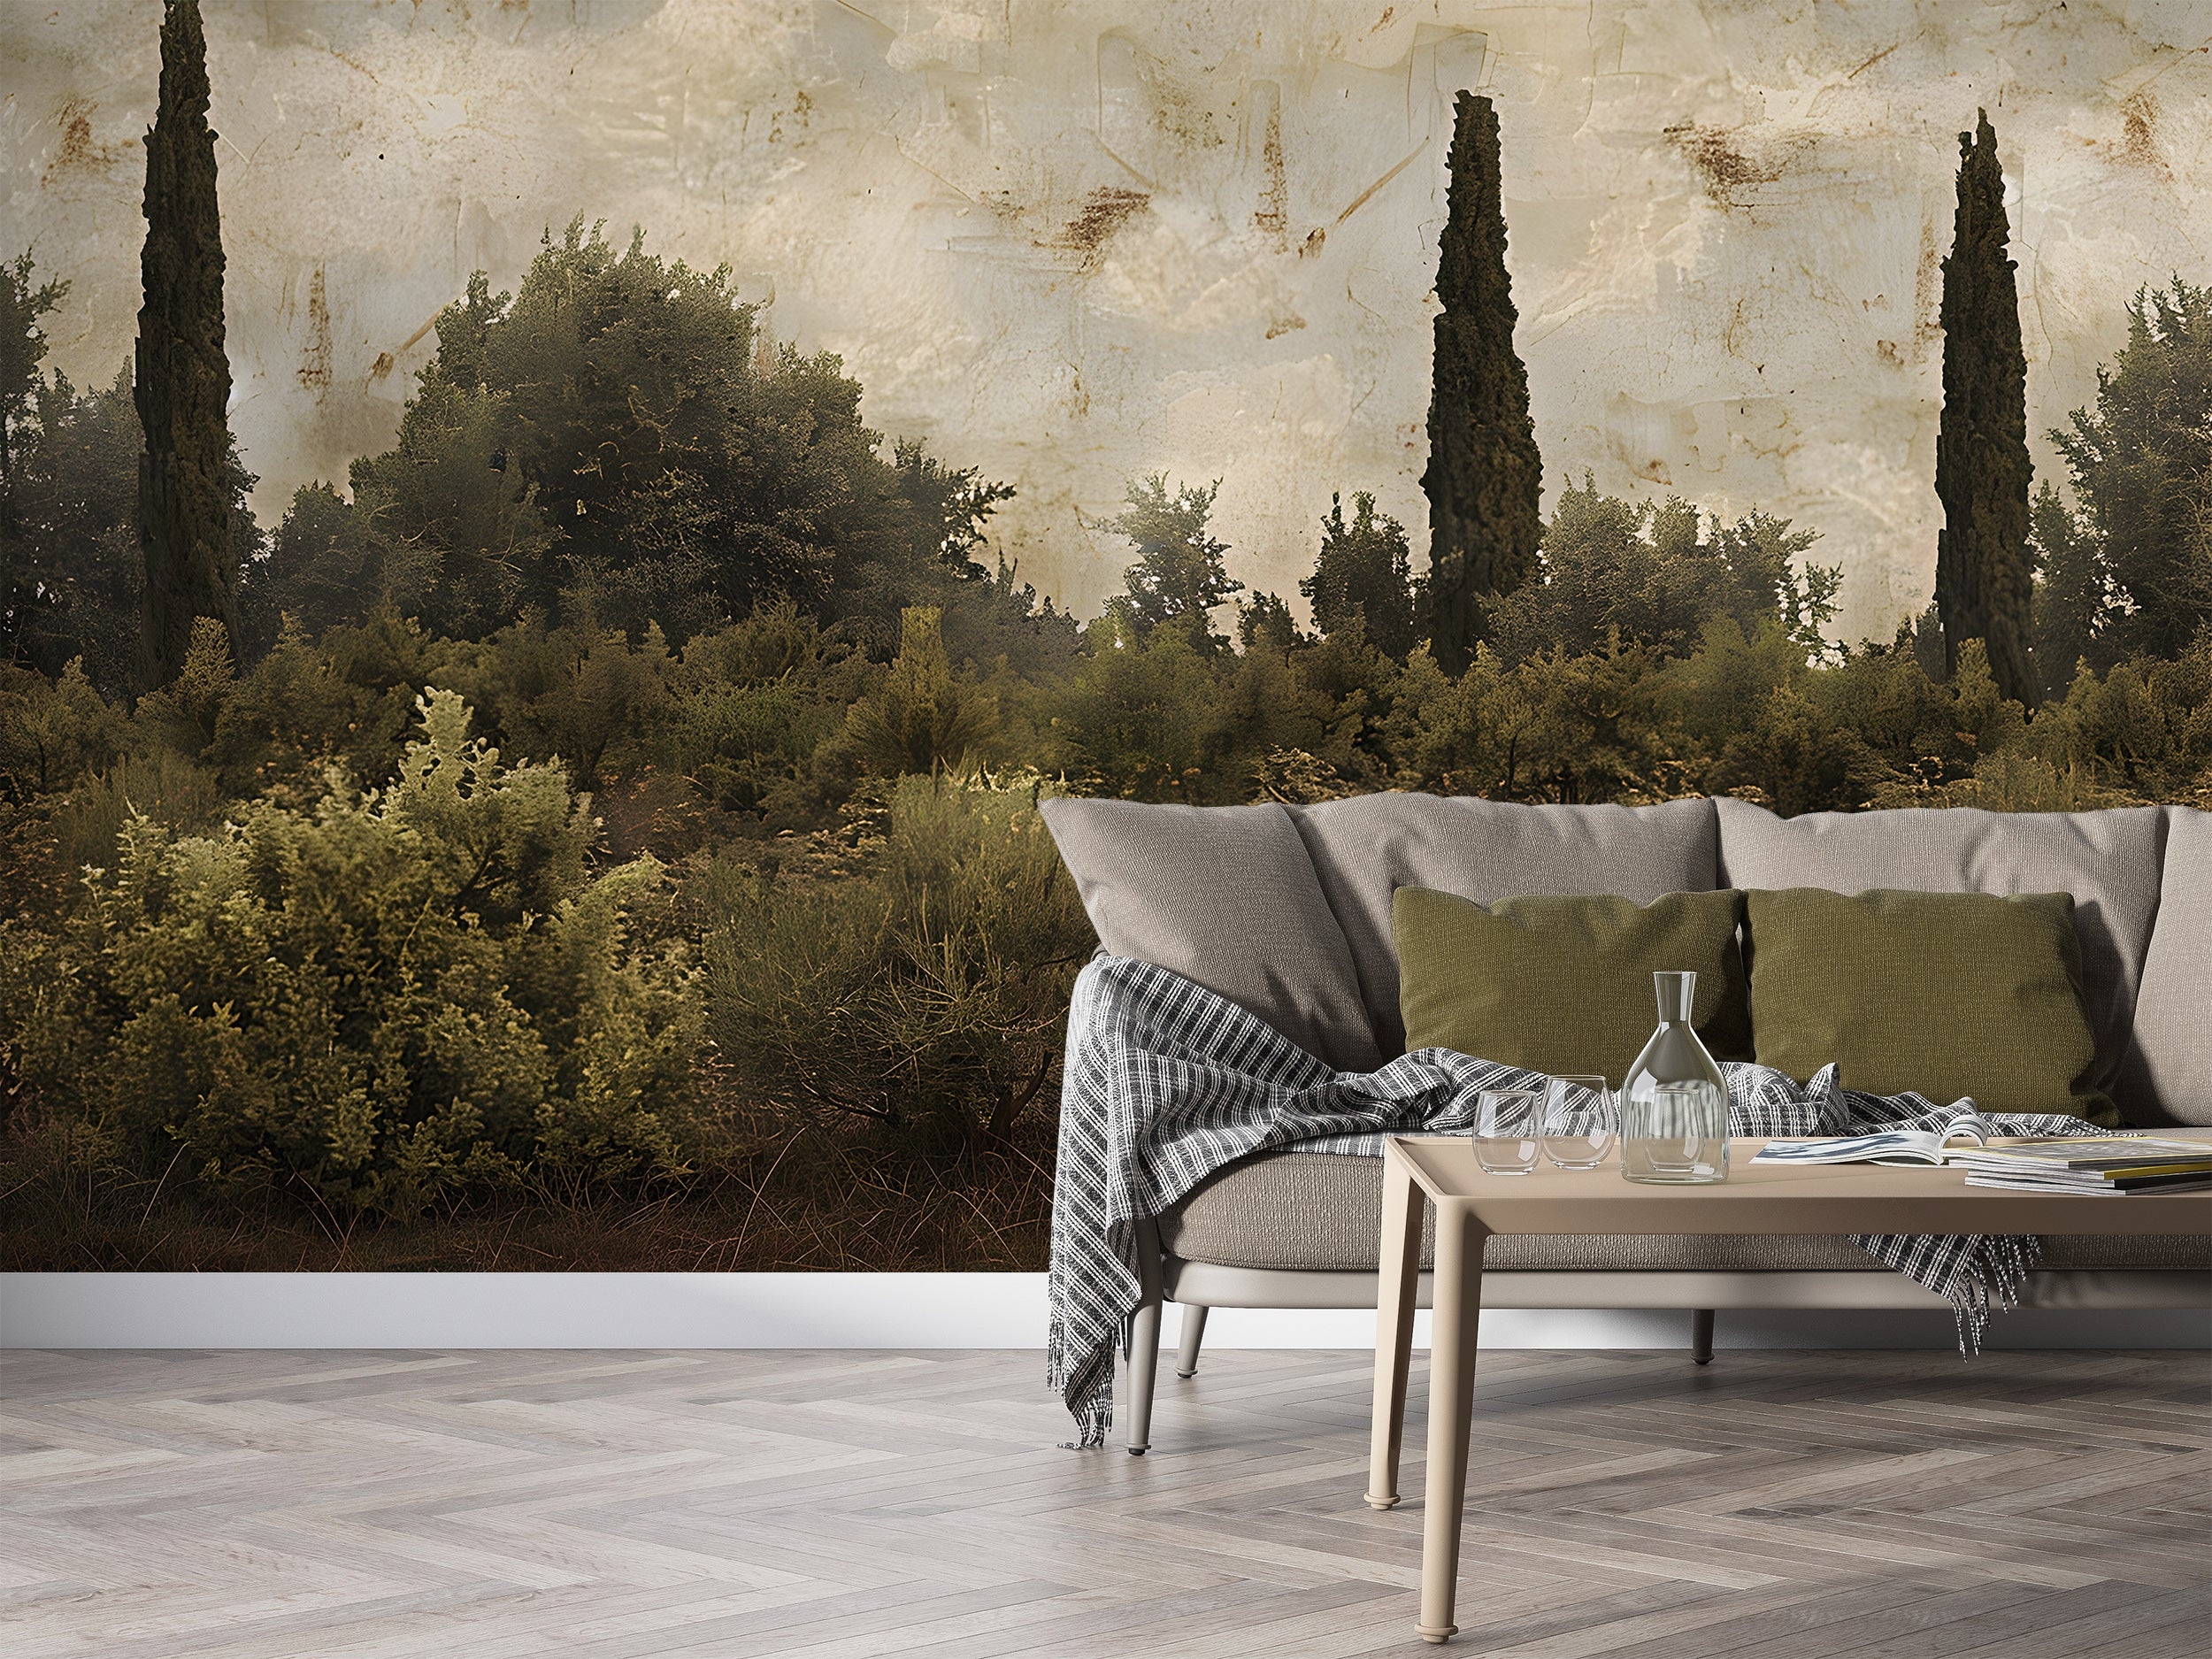 Vintage landscape wall mural peel and stick Rustic botanical wallpaper for home decor